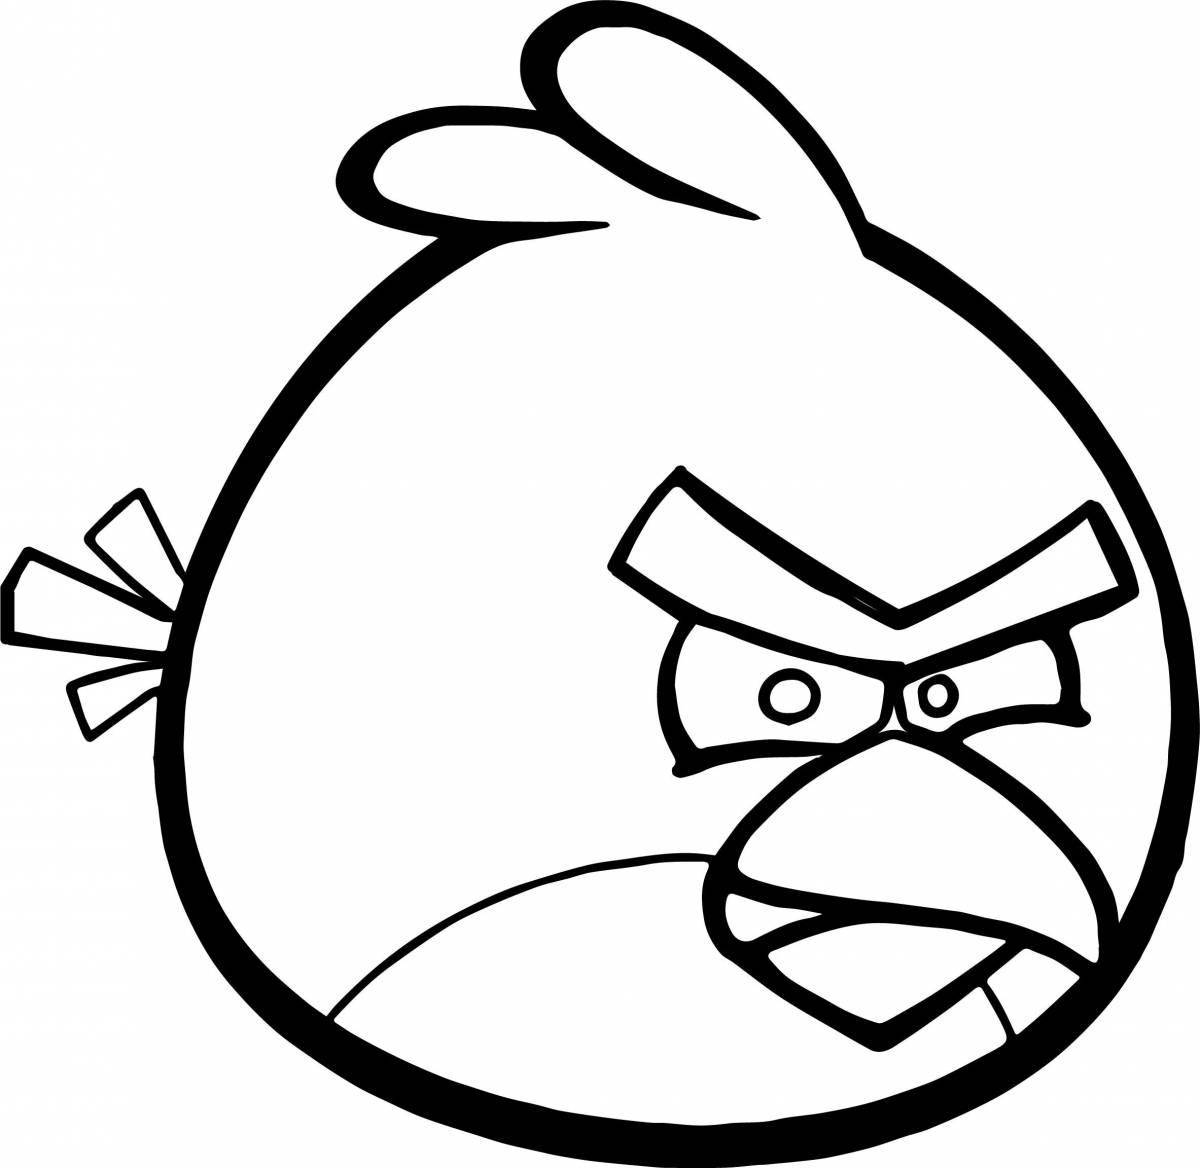 Angry birds 2 coloring book